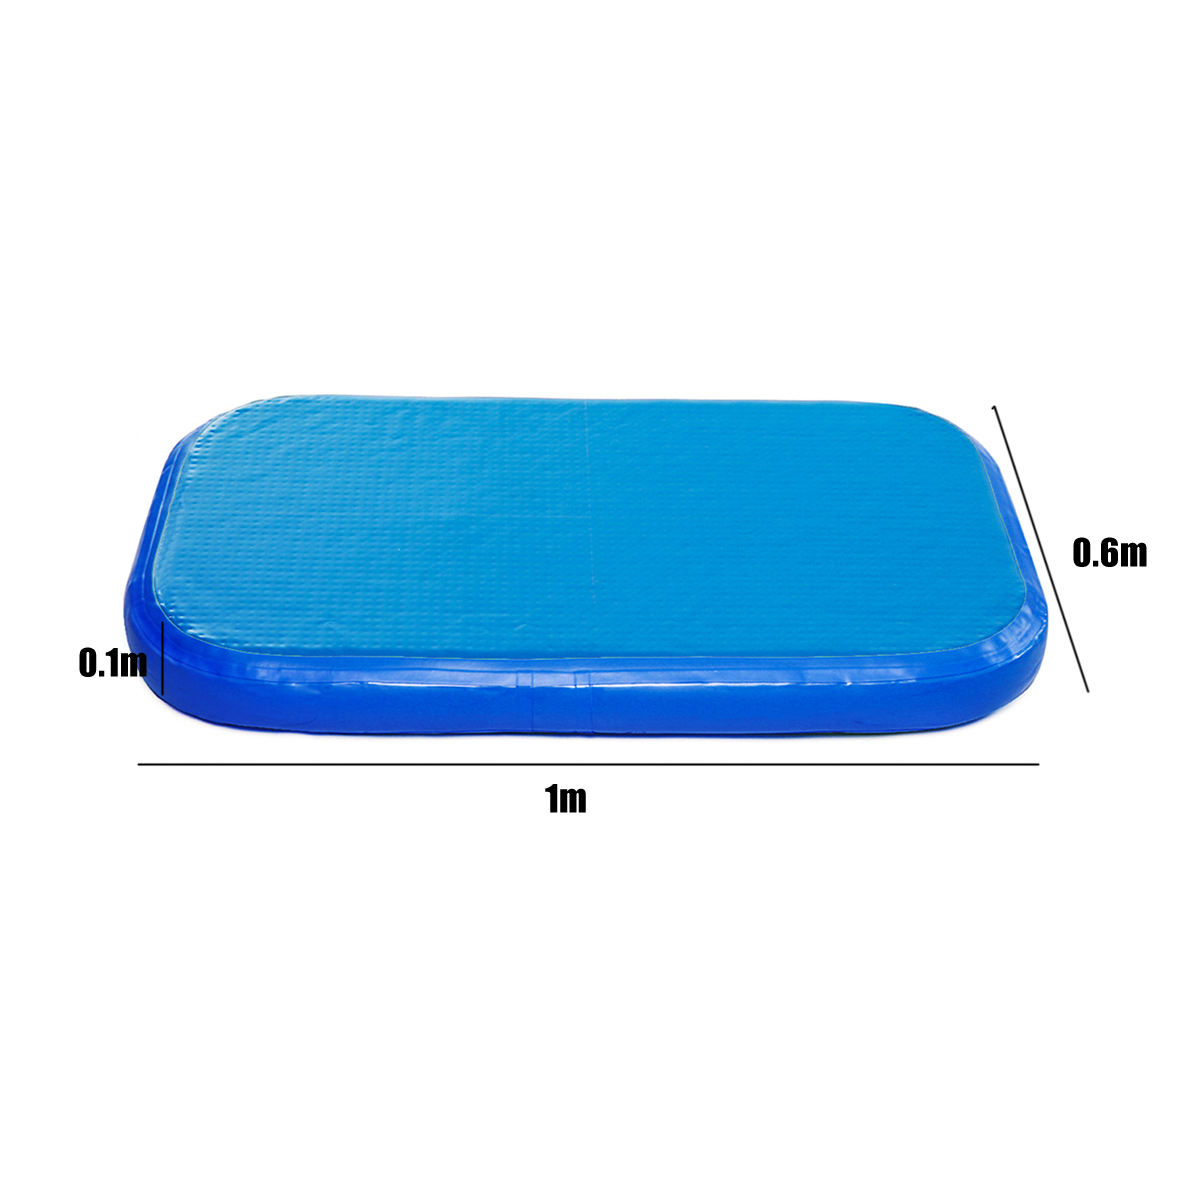 393x236x39inch-Airtrack-Gymnastics-Mat-Inflatable-GYM-Air-Track-Mat-GYM-Practice-Training-Tumbling-M-1313446-3